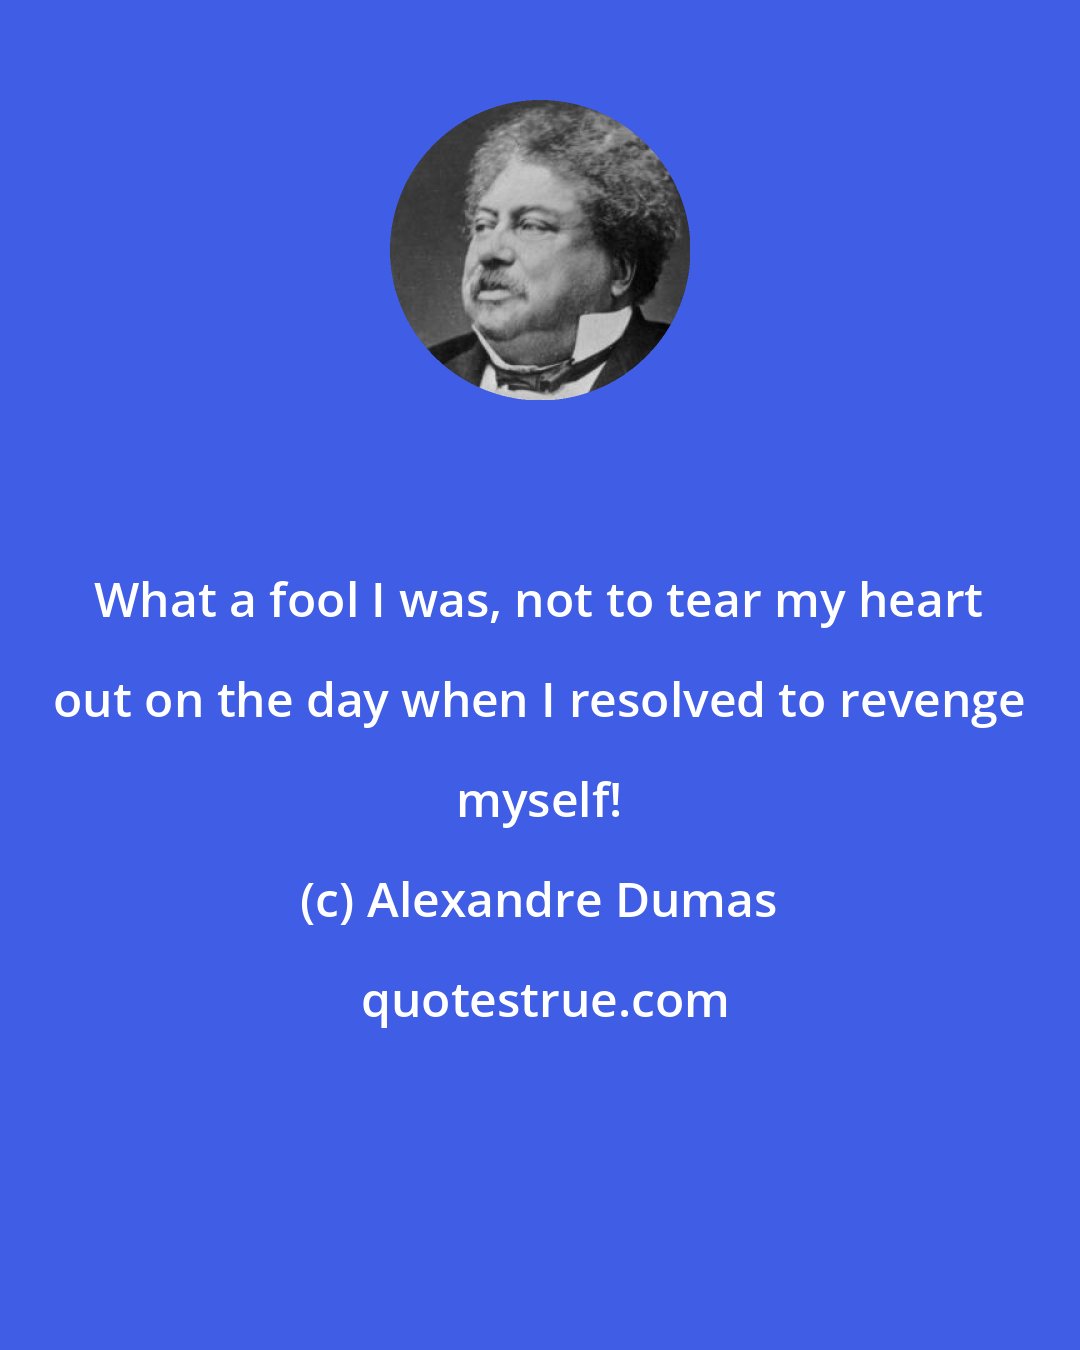 Alexandre Dumas: What a fool I was, not to tear my heart out on the day when I resolved to revenge myself!